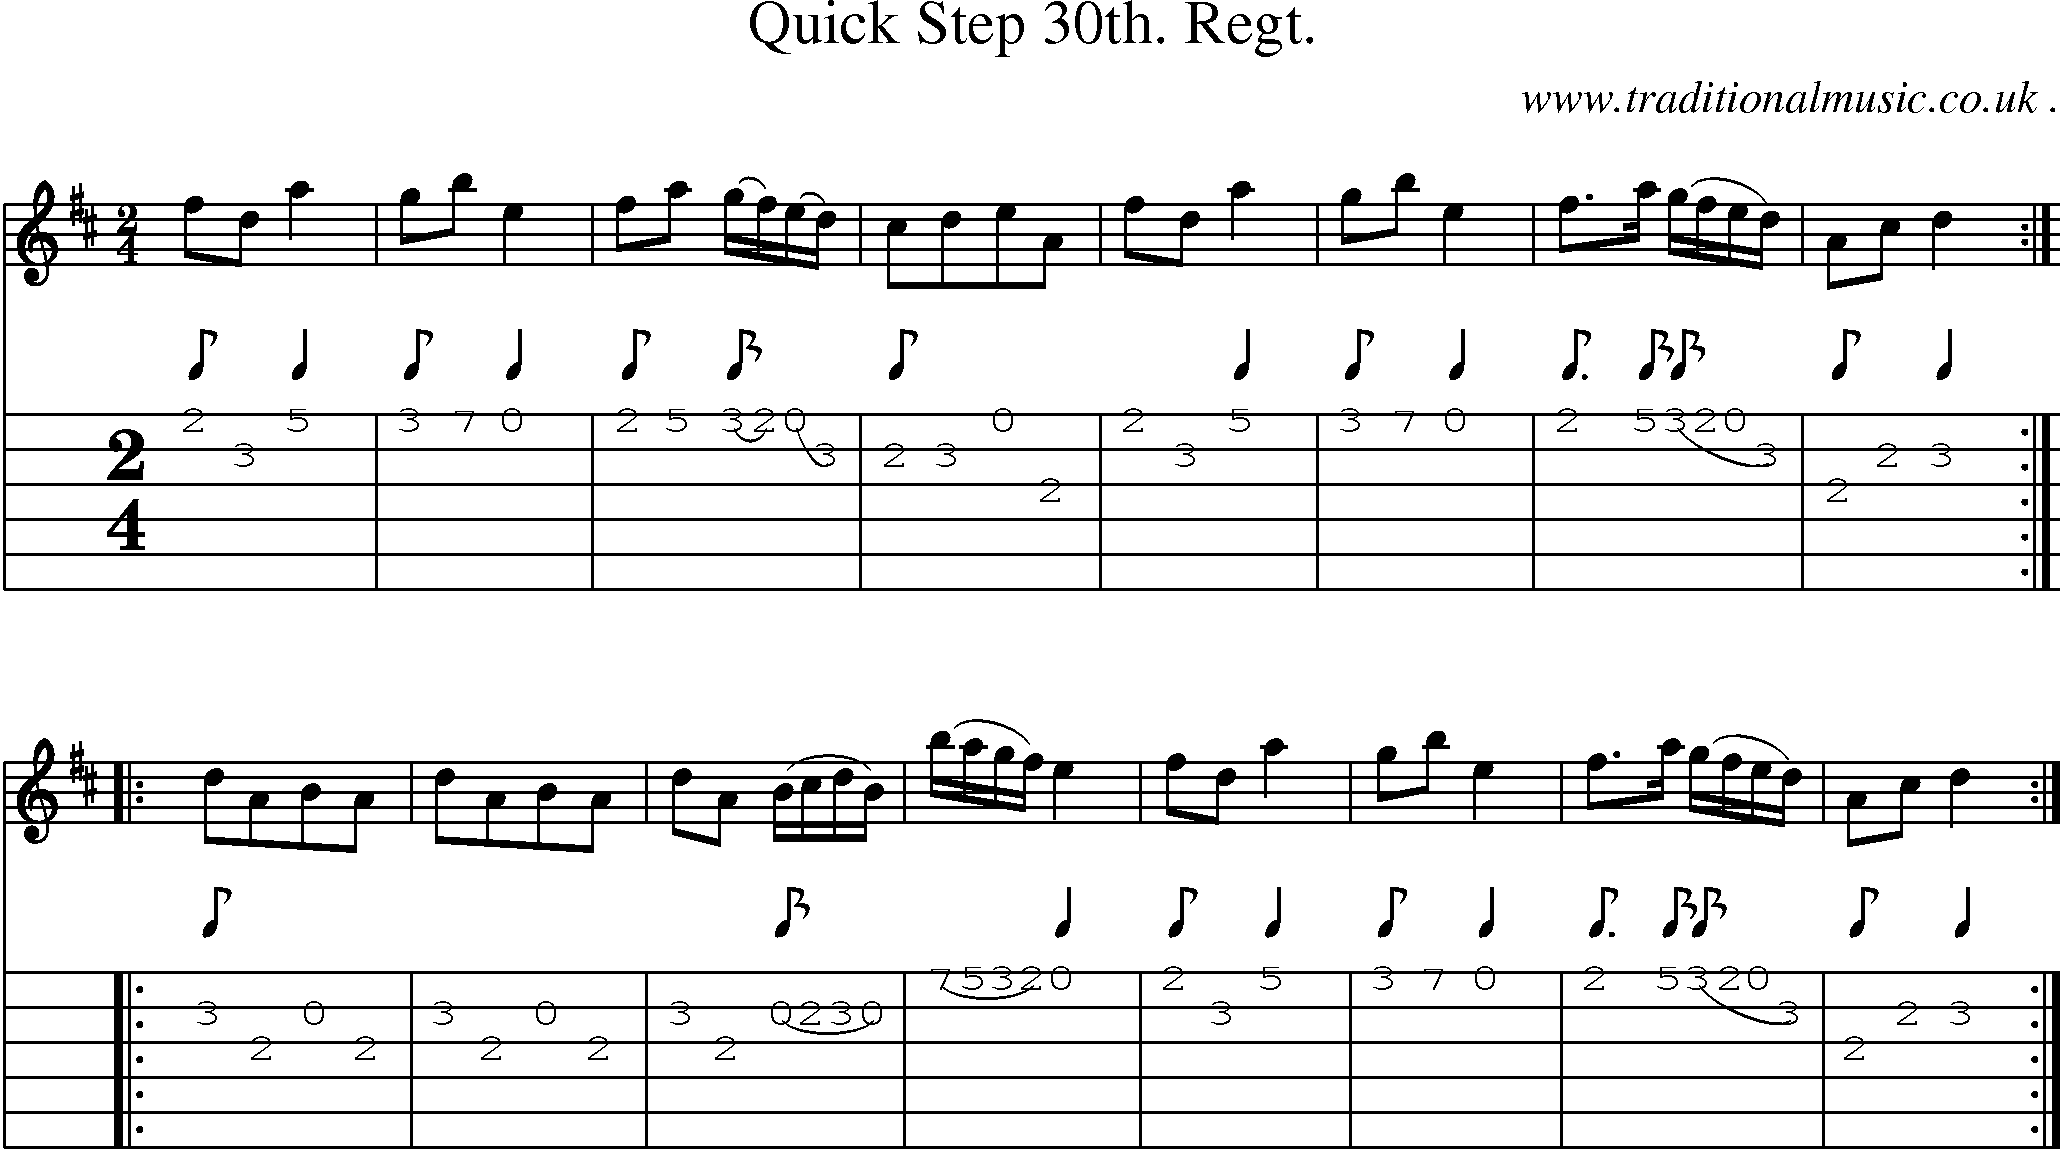 Sheet-Music and Guitar Tabs for Quick Step 30th Regt